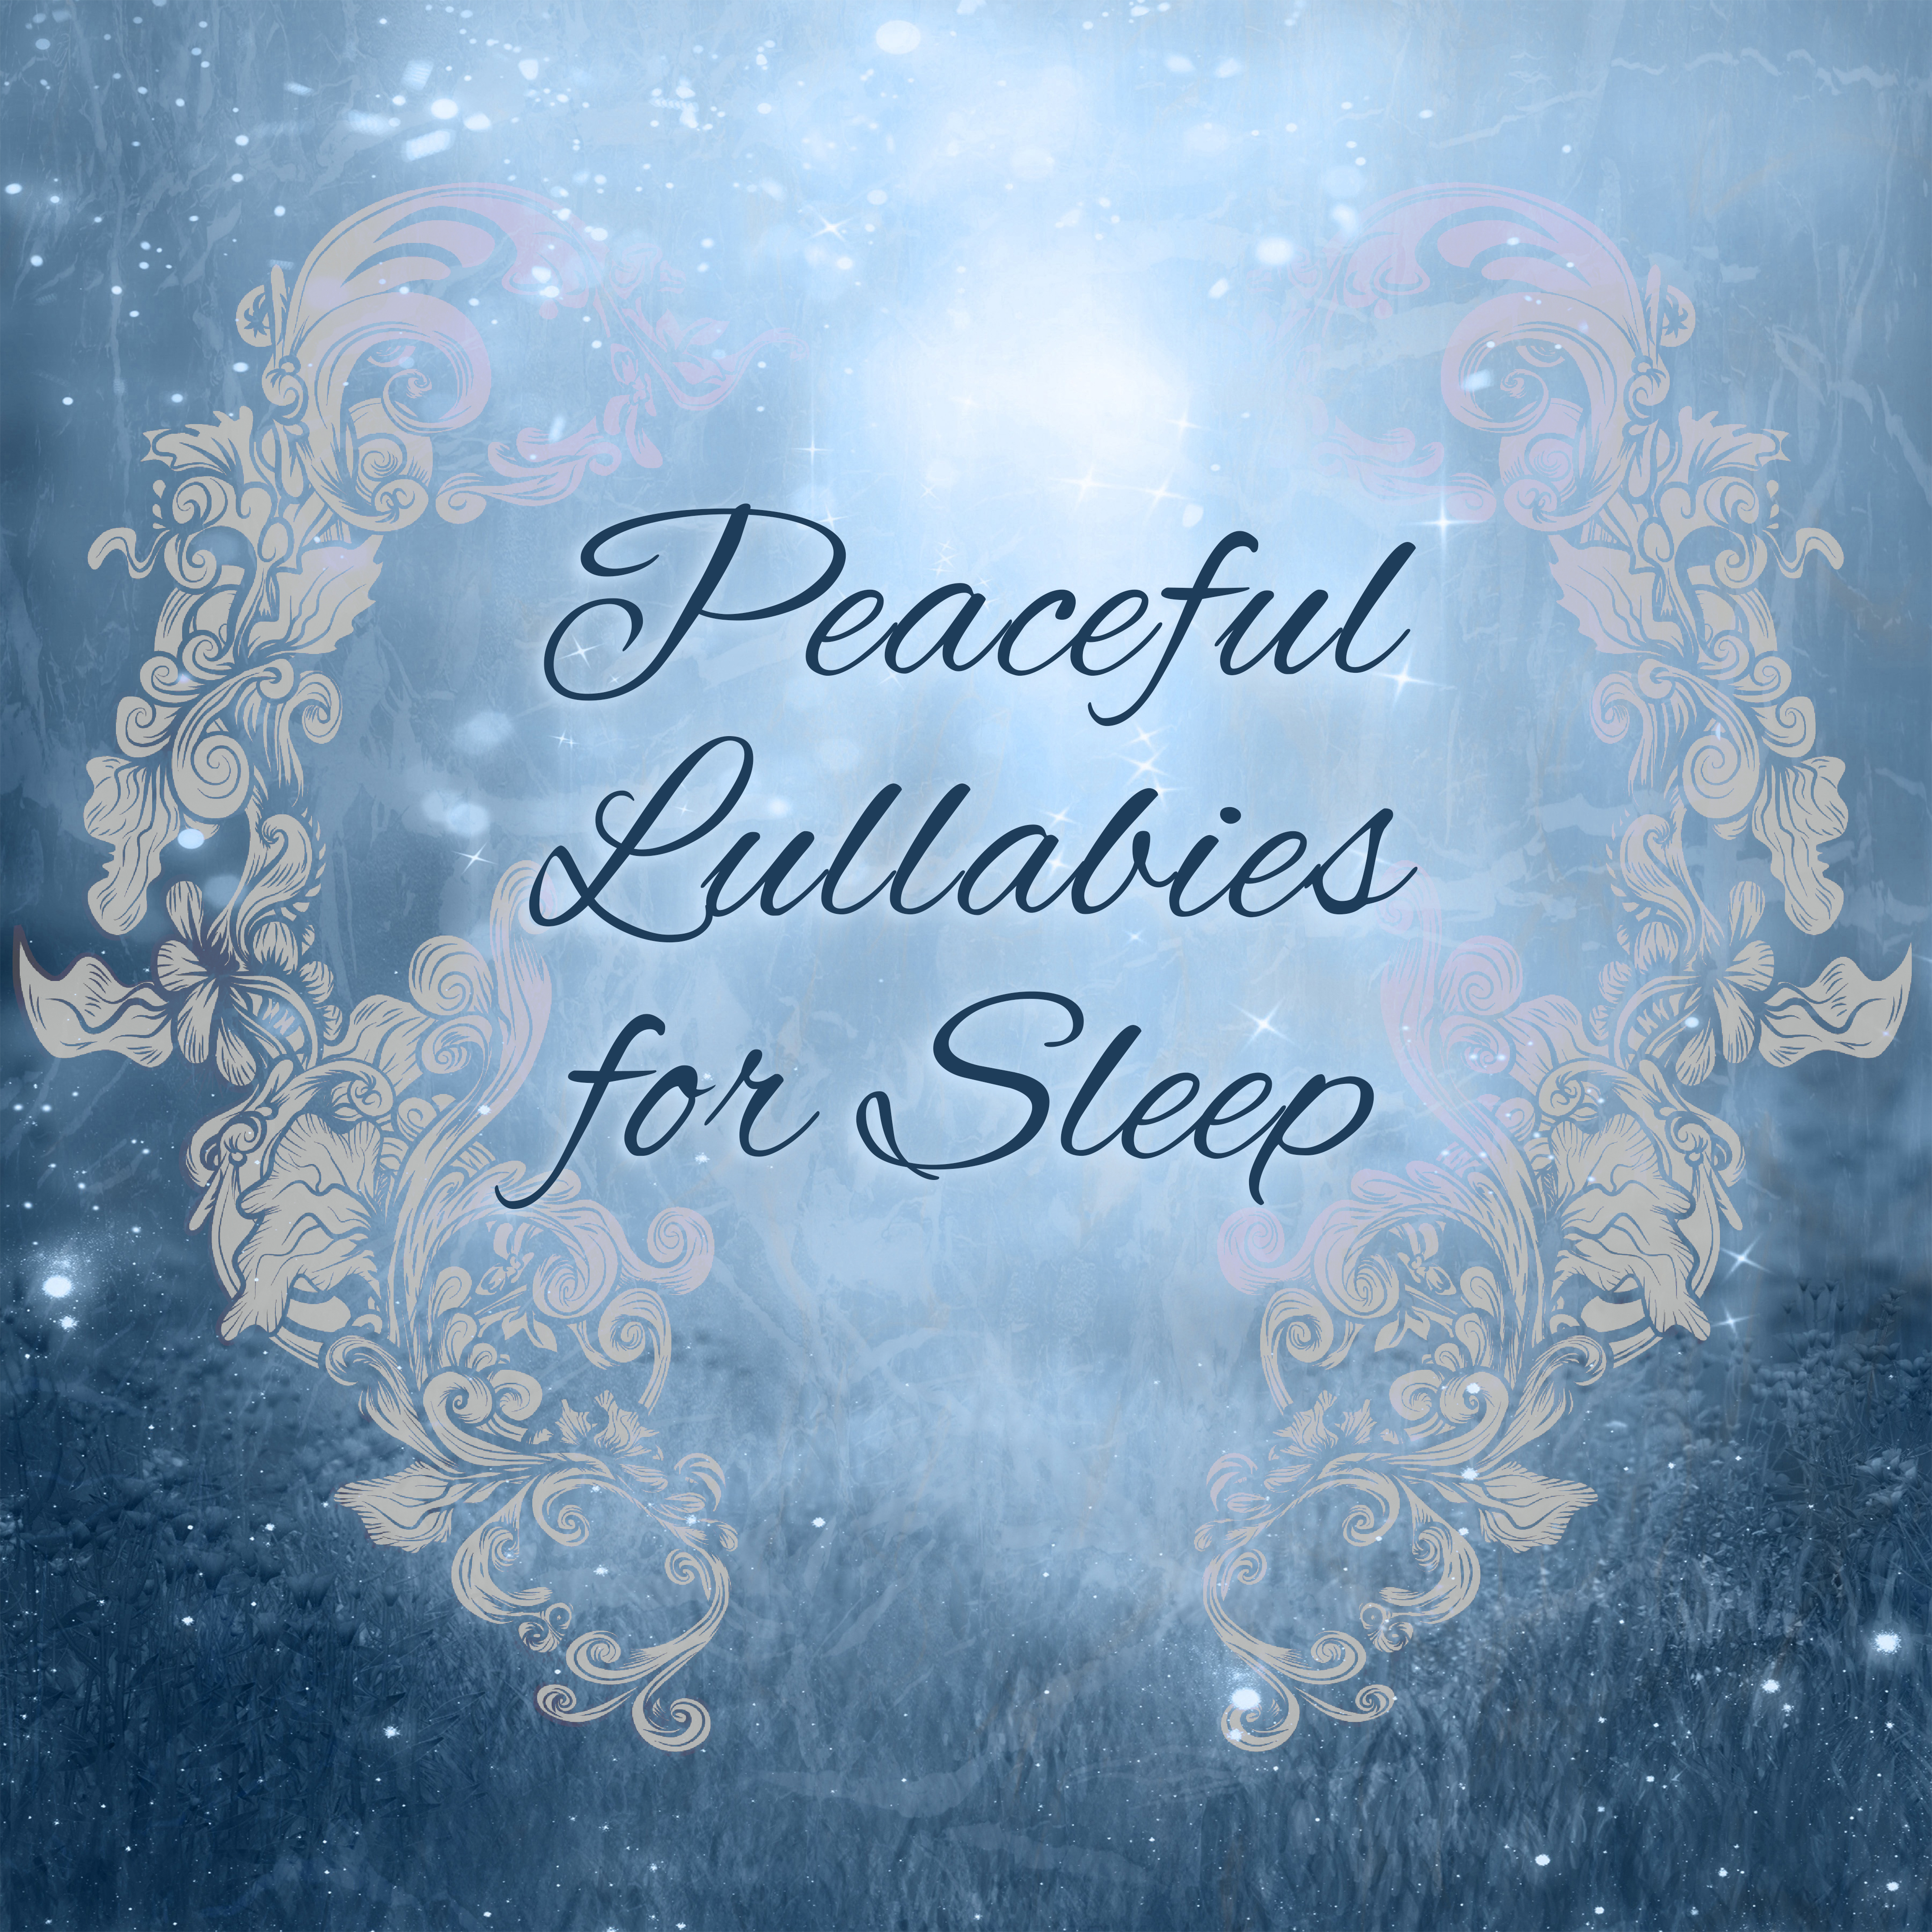 Peaceful Lullabies for Sleep – Soft Music at Goodnight, Relaxing Music, Restful Sleep, Bedtime, Nature Sounds, Sweet Dreams, Deep Relief